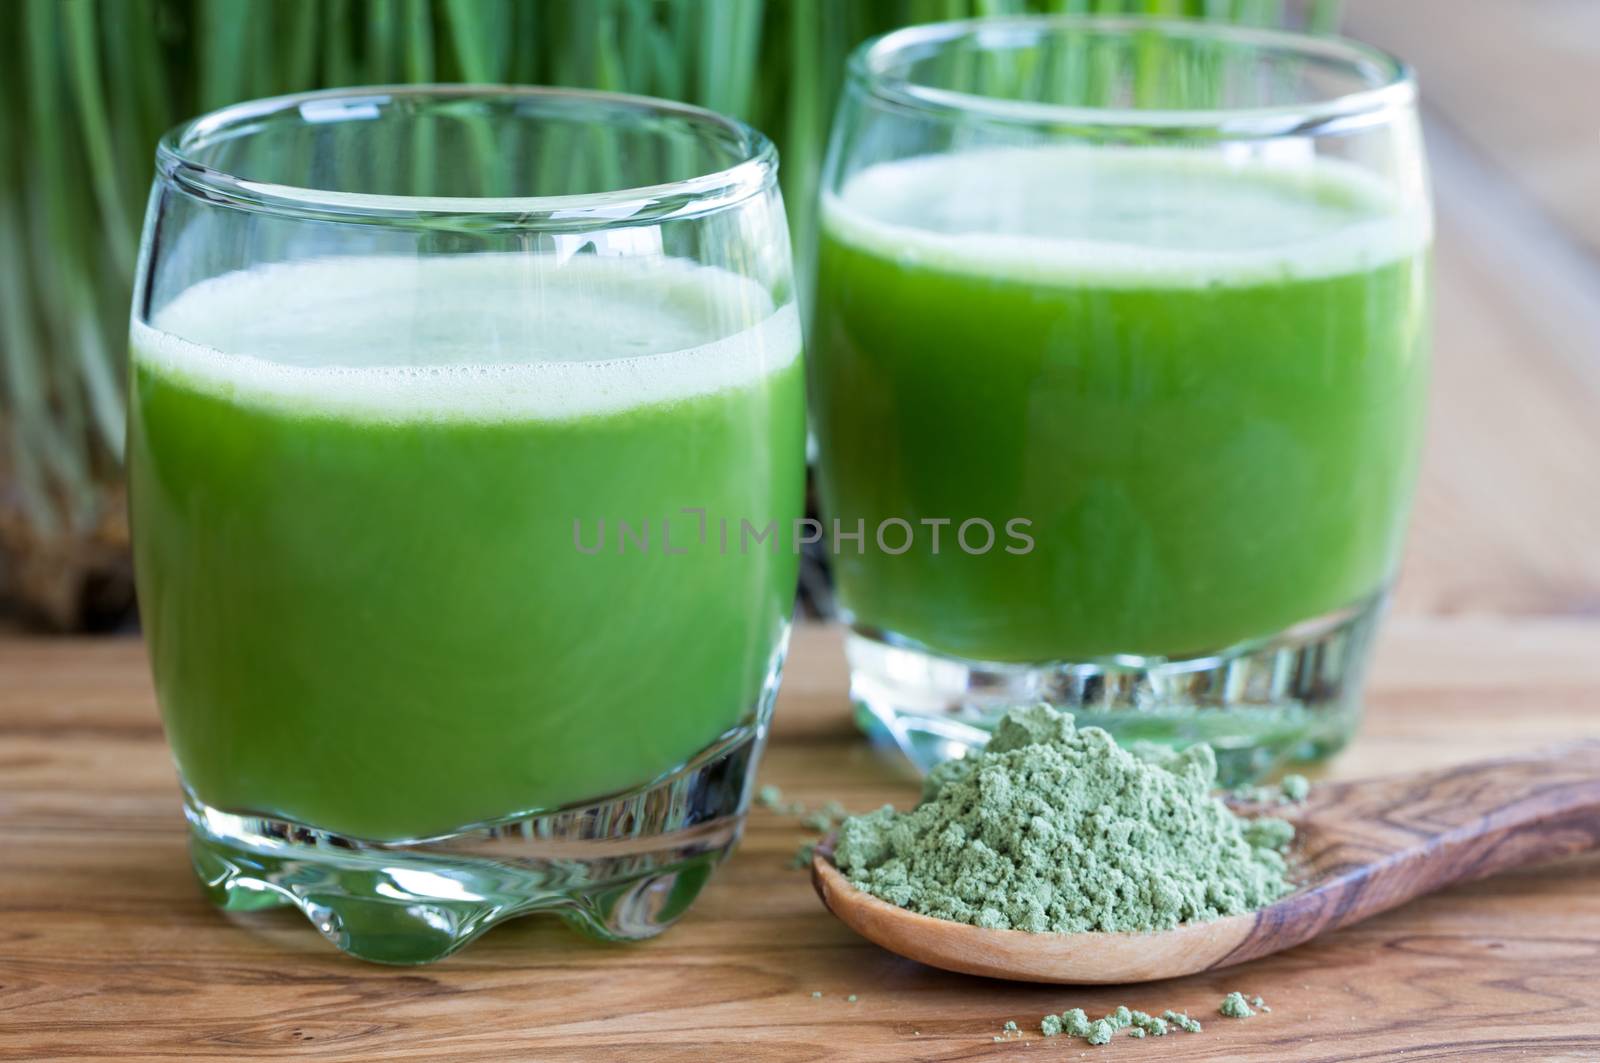 Two shots of fresh barley grass juice, with barley grass powder in the foreground